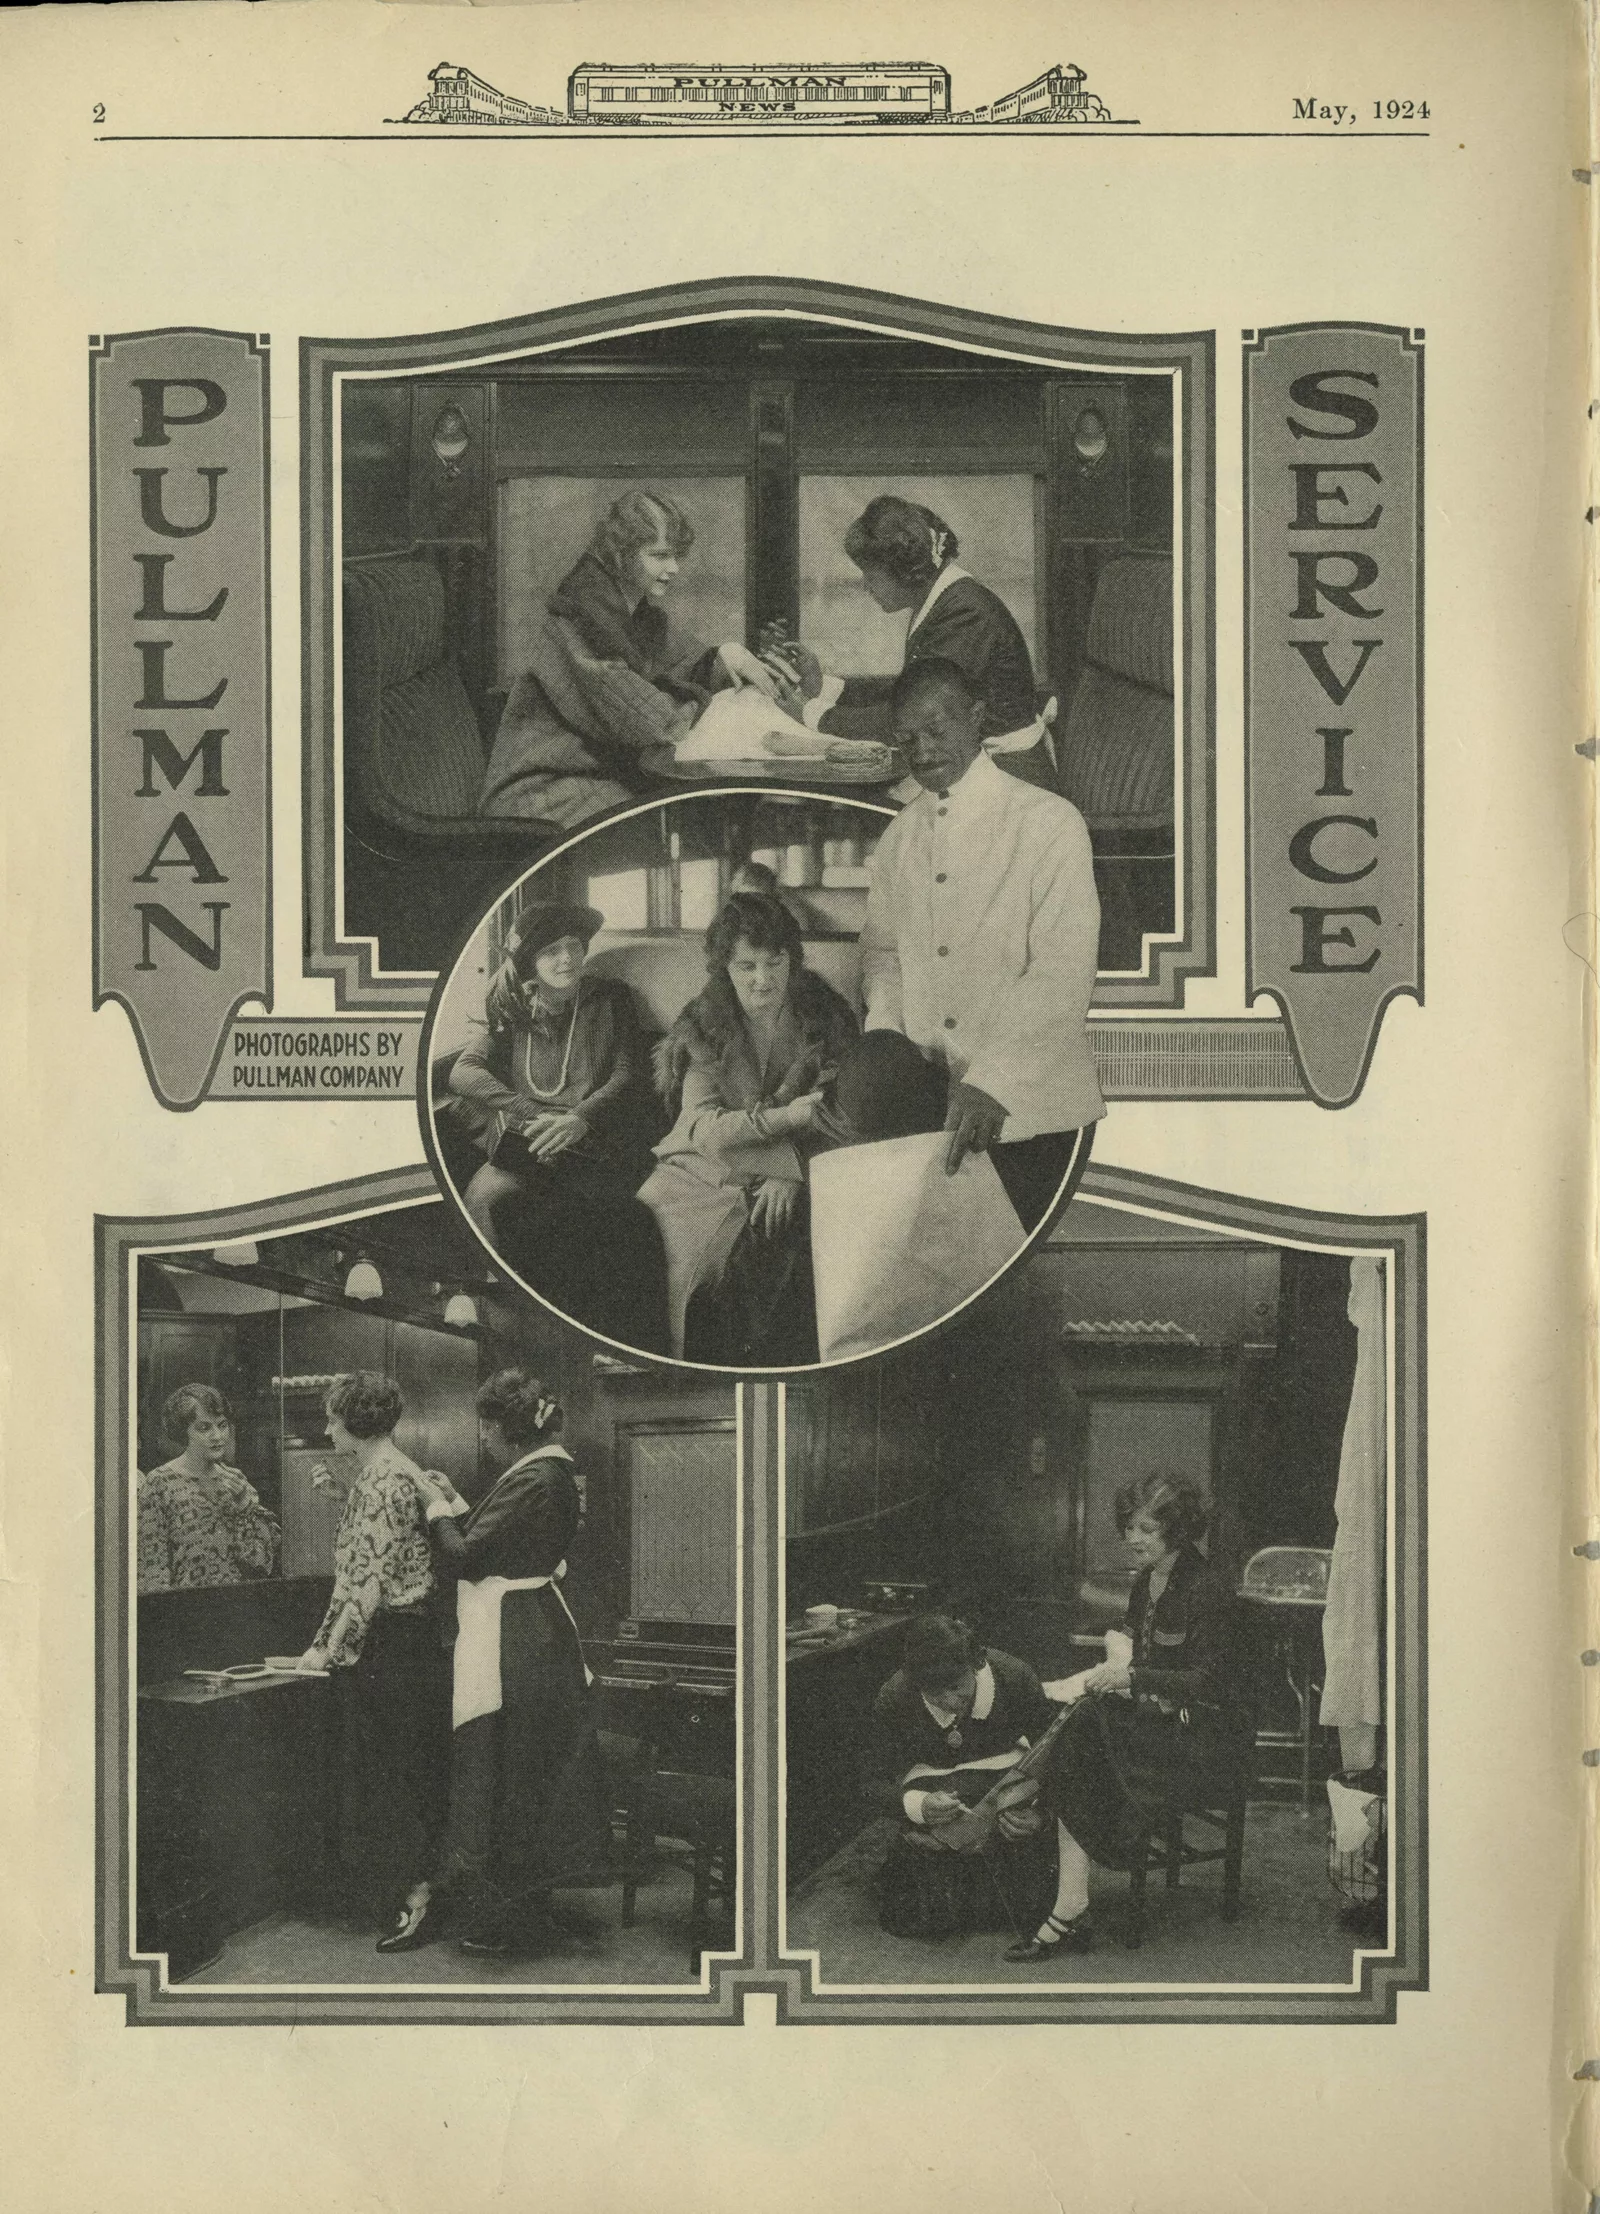 Photographs of Pullman maids appear along with the headline "Pullman Service" in a 1924 company magazine